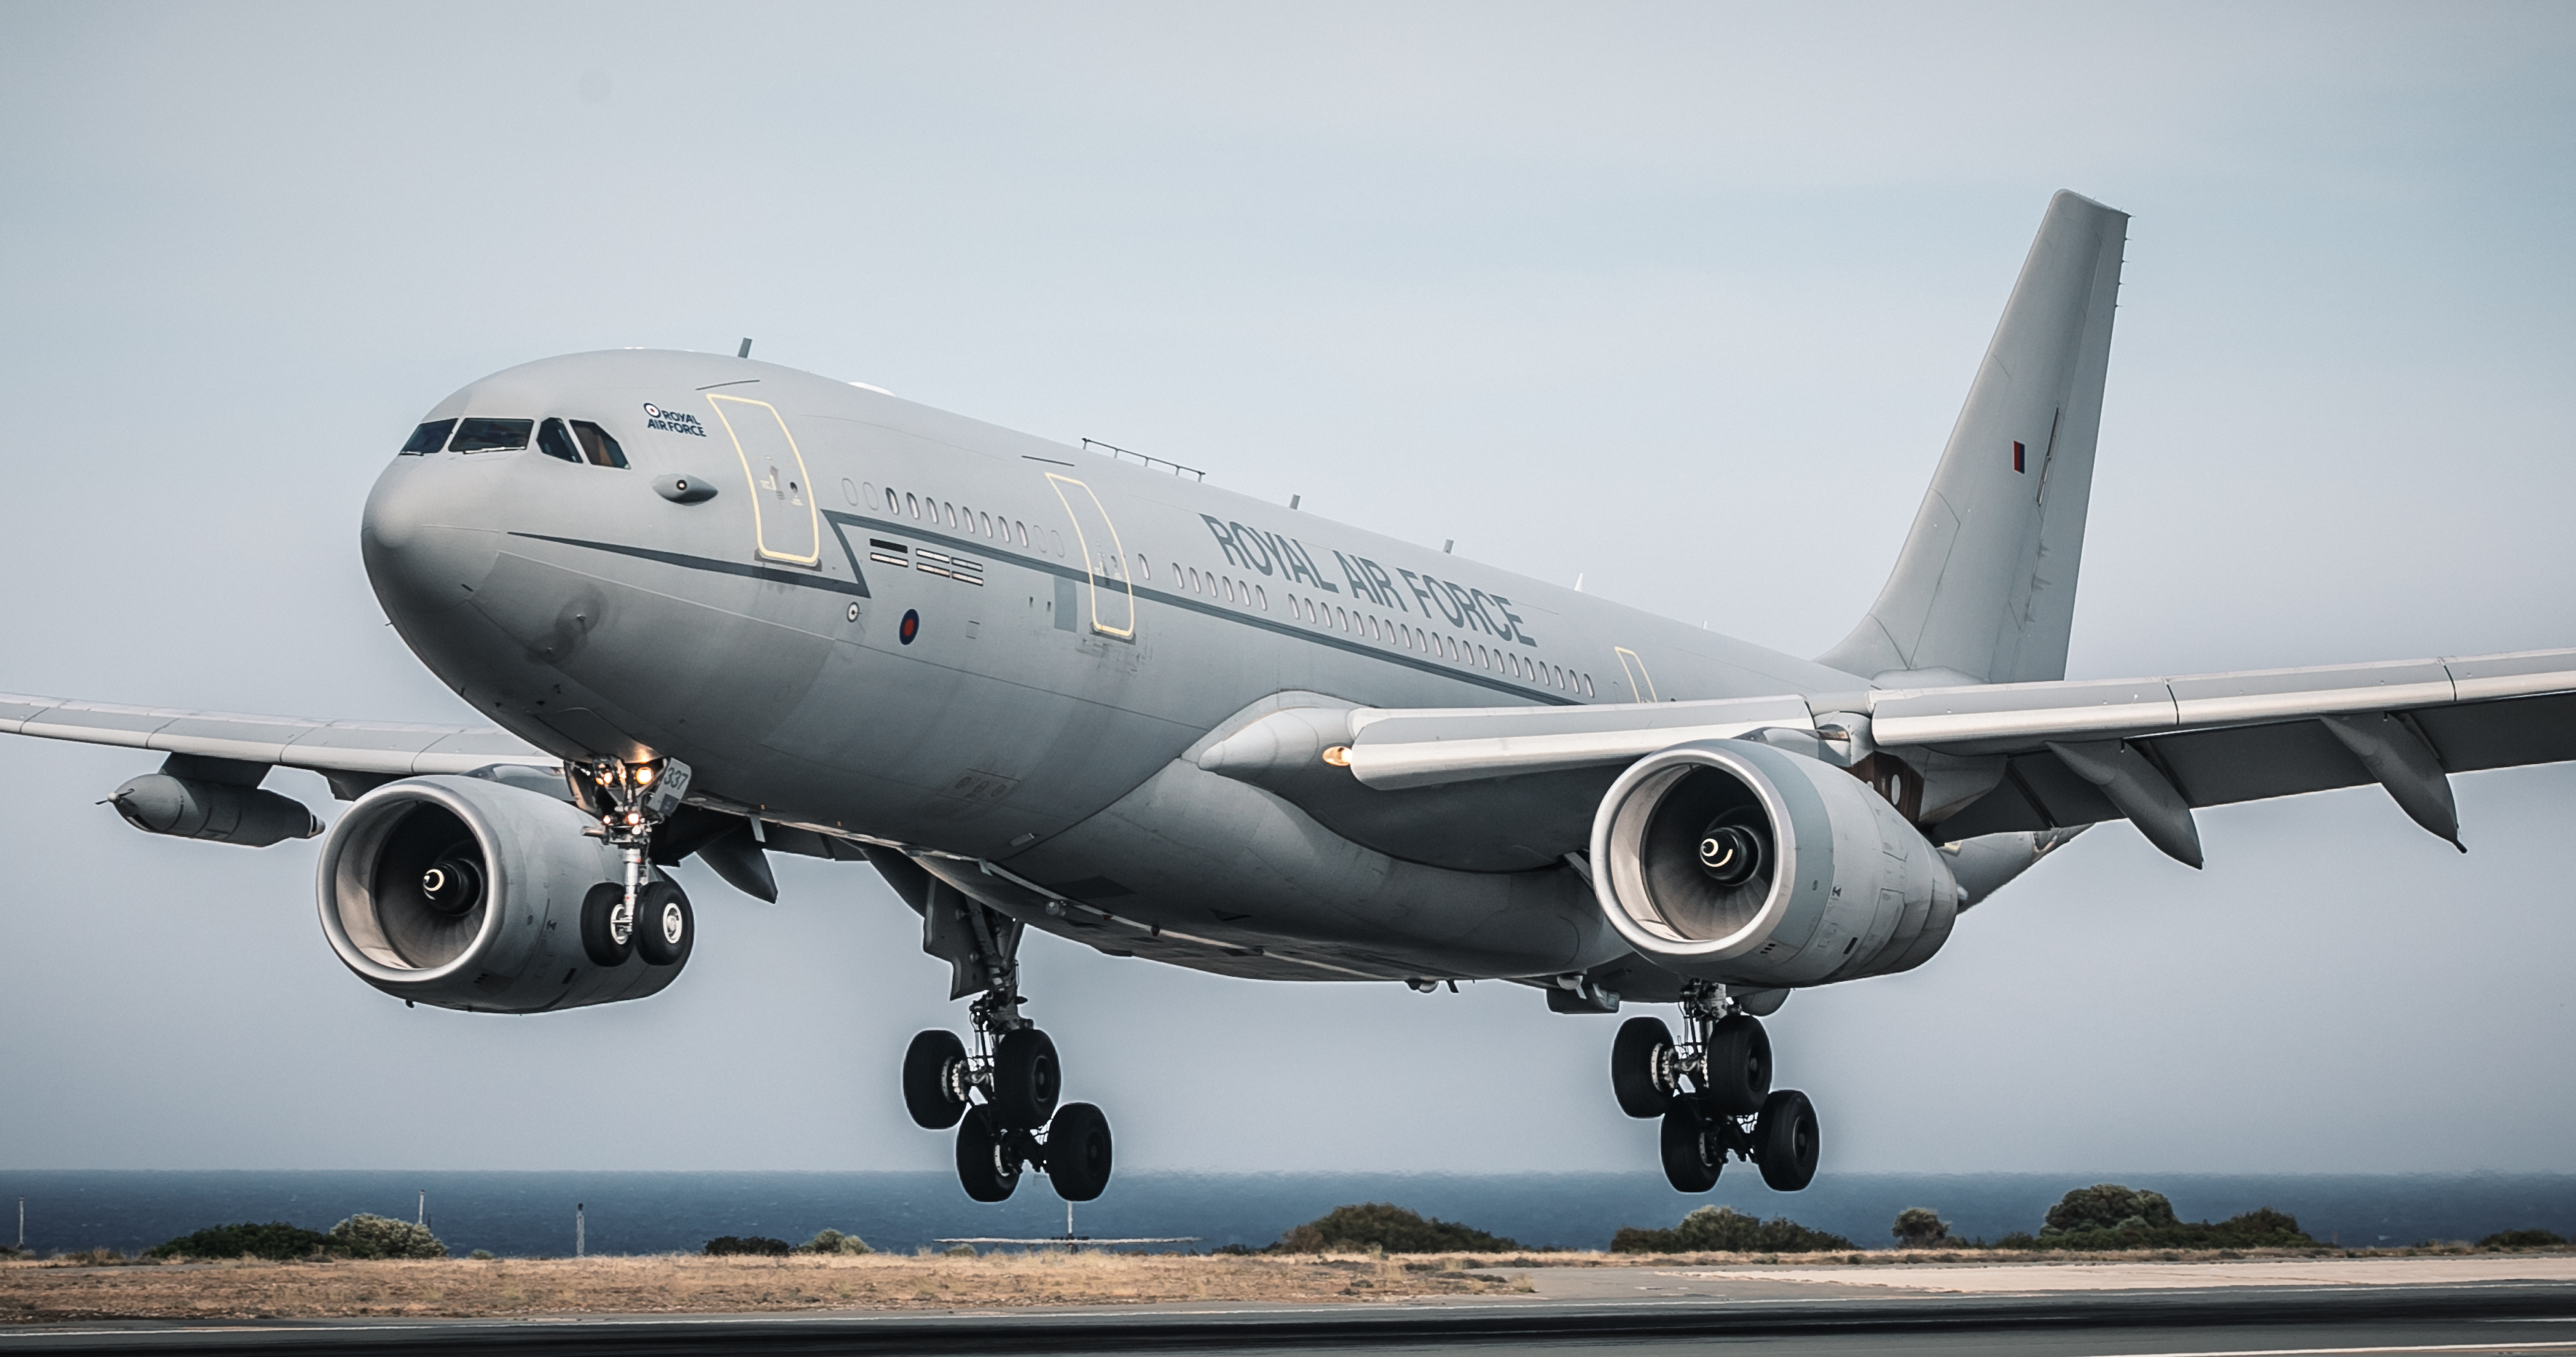 RAF Voyager aircraft taking off.